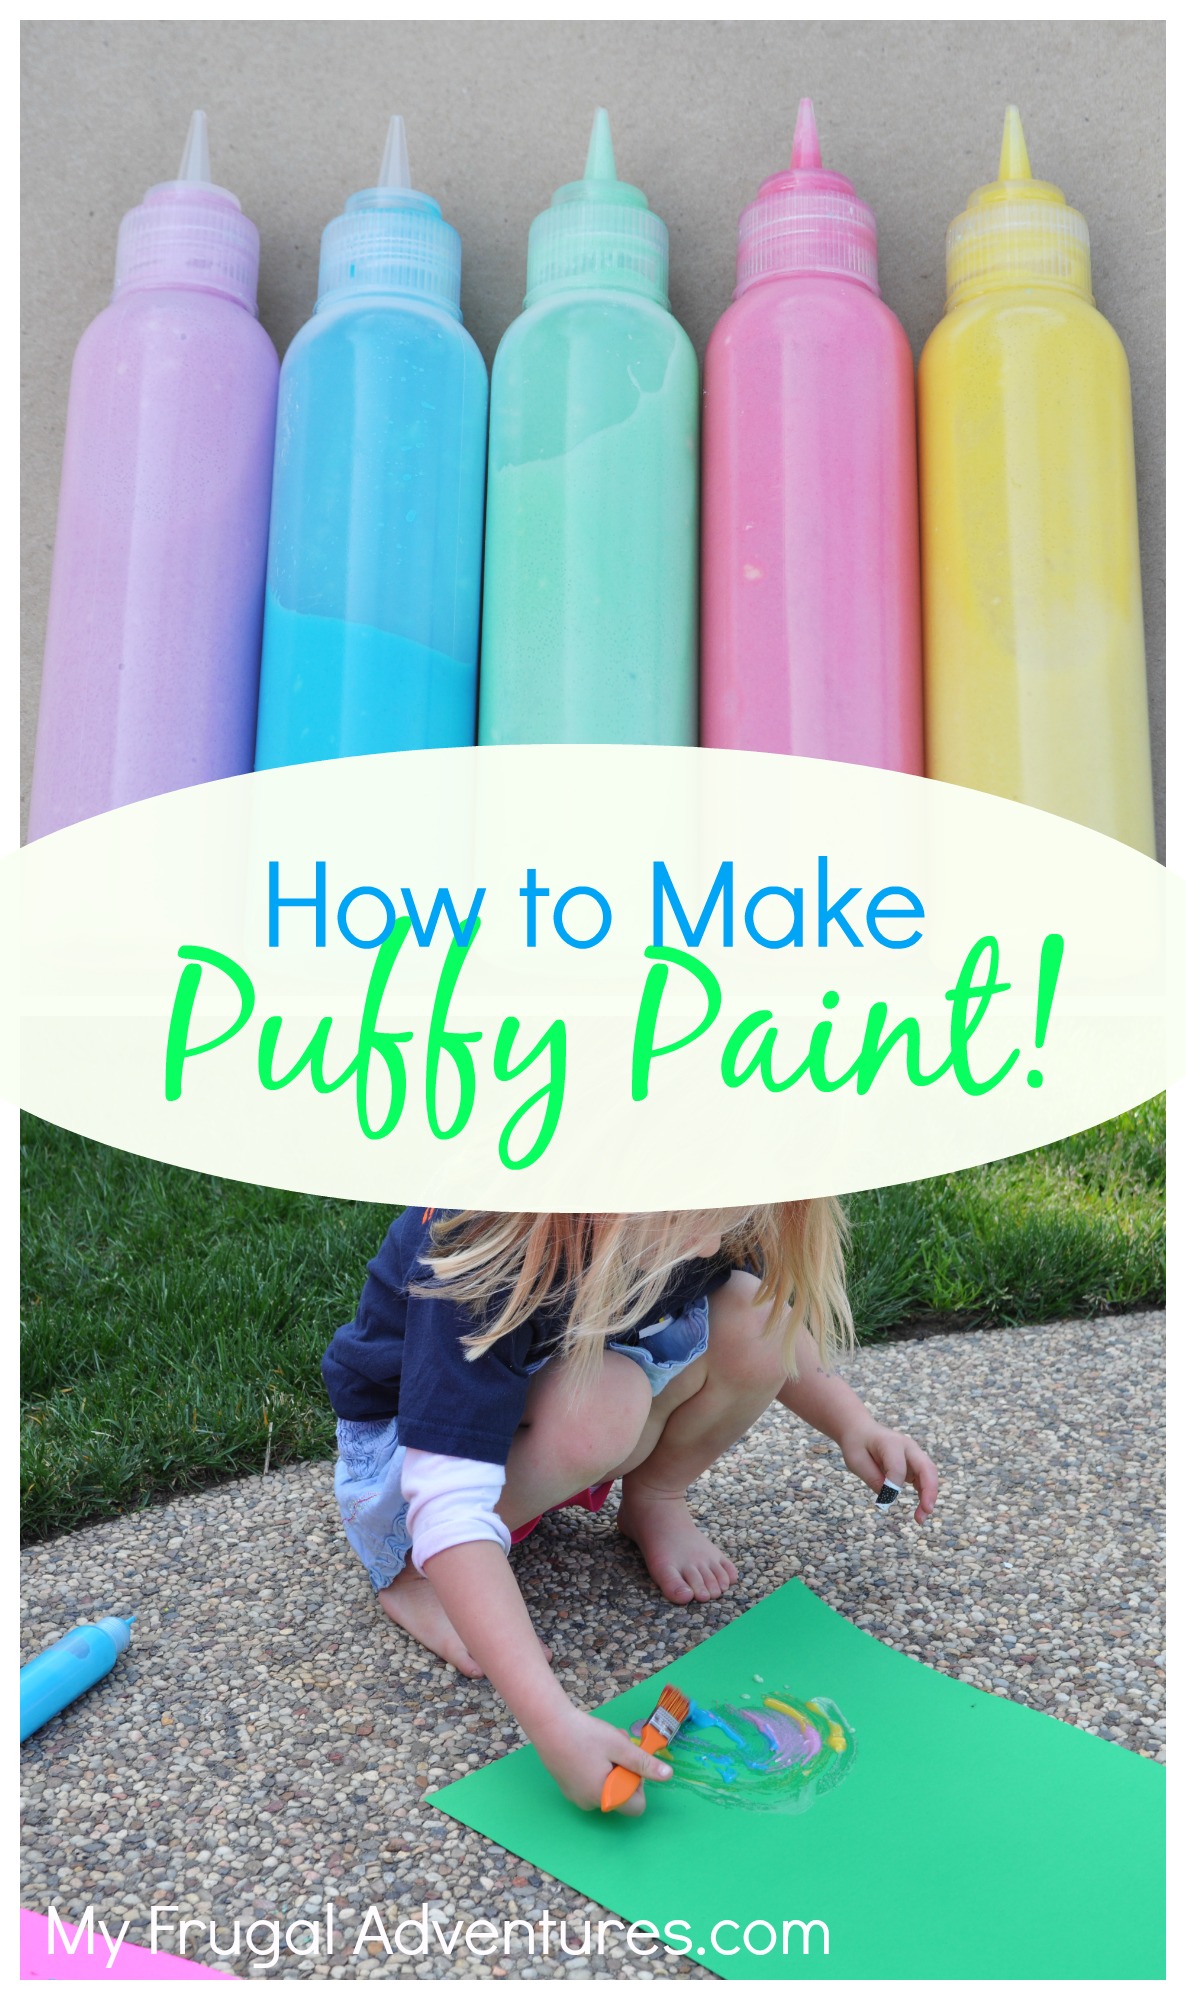 This is How: We make puffy paint